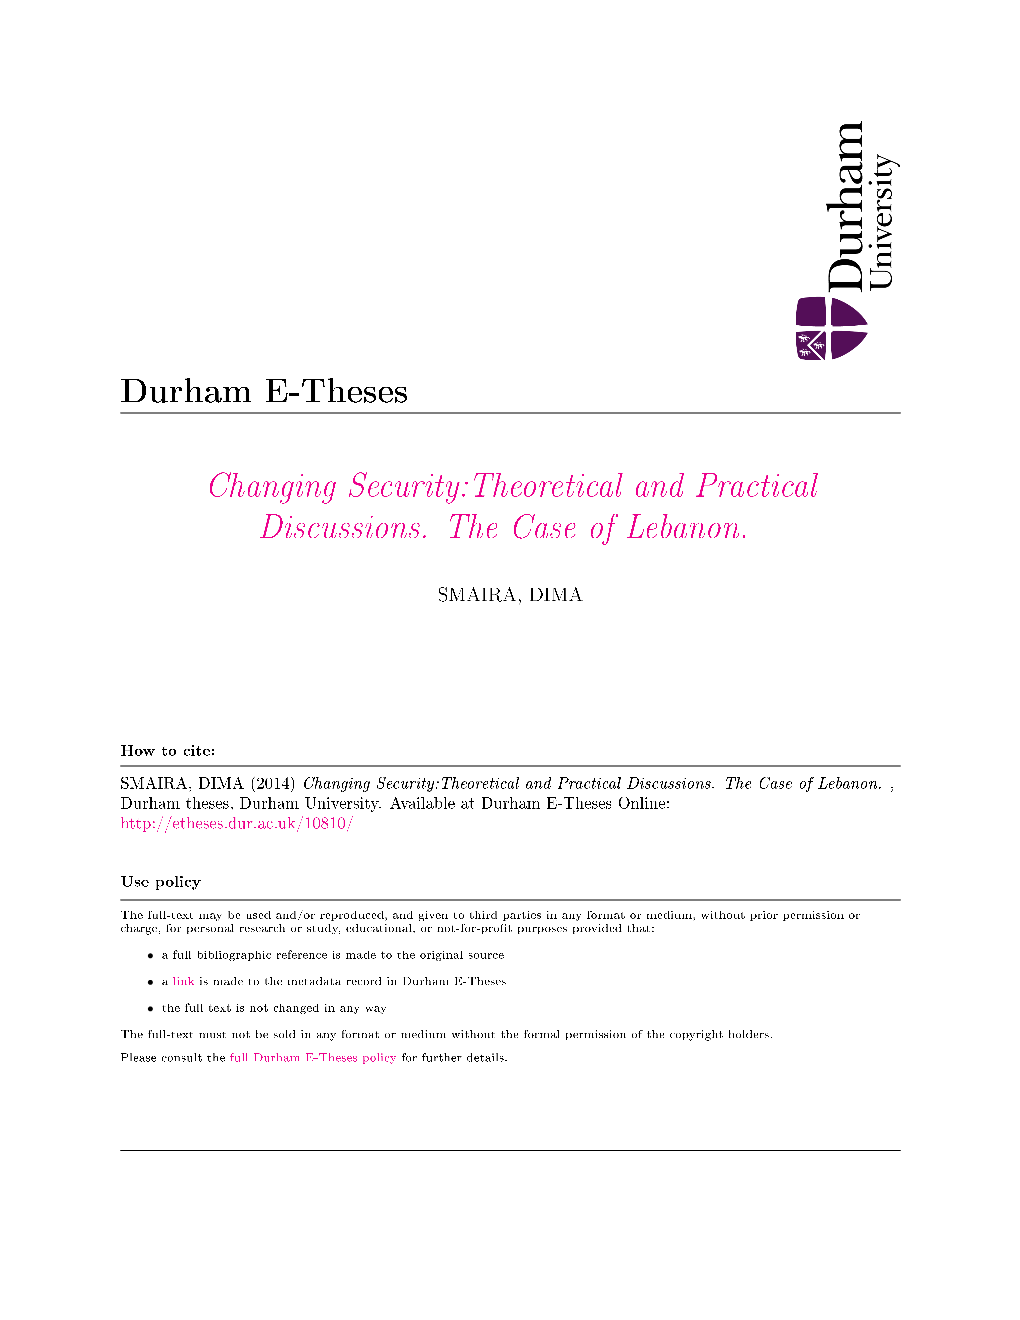 Changing Security:Theoretical and Practical Discussions